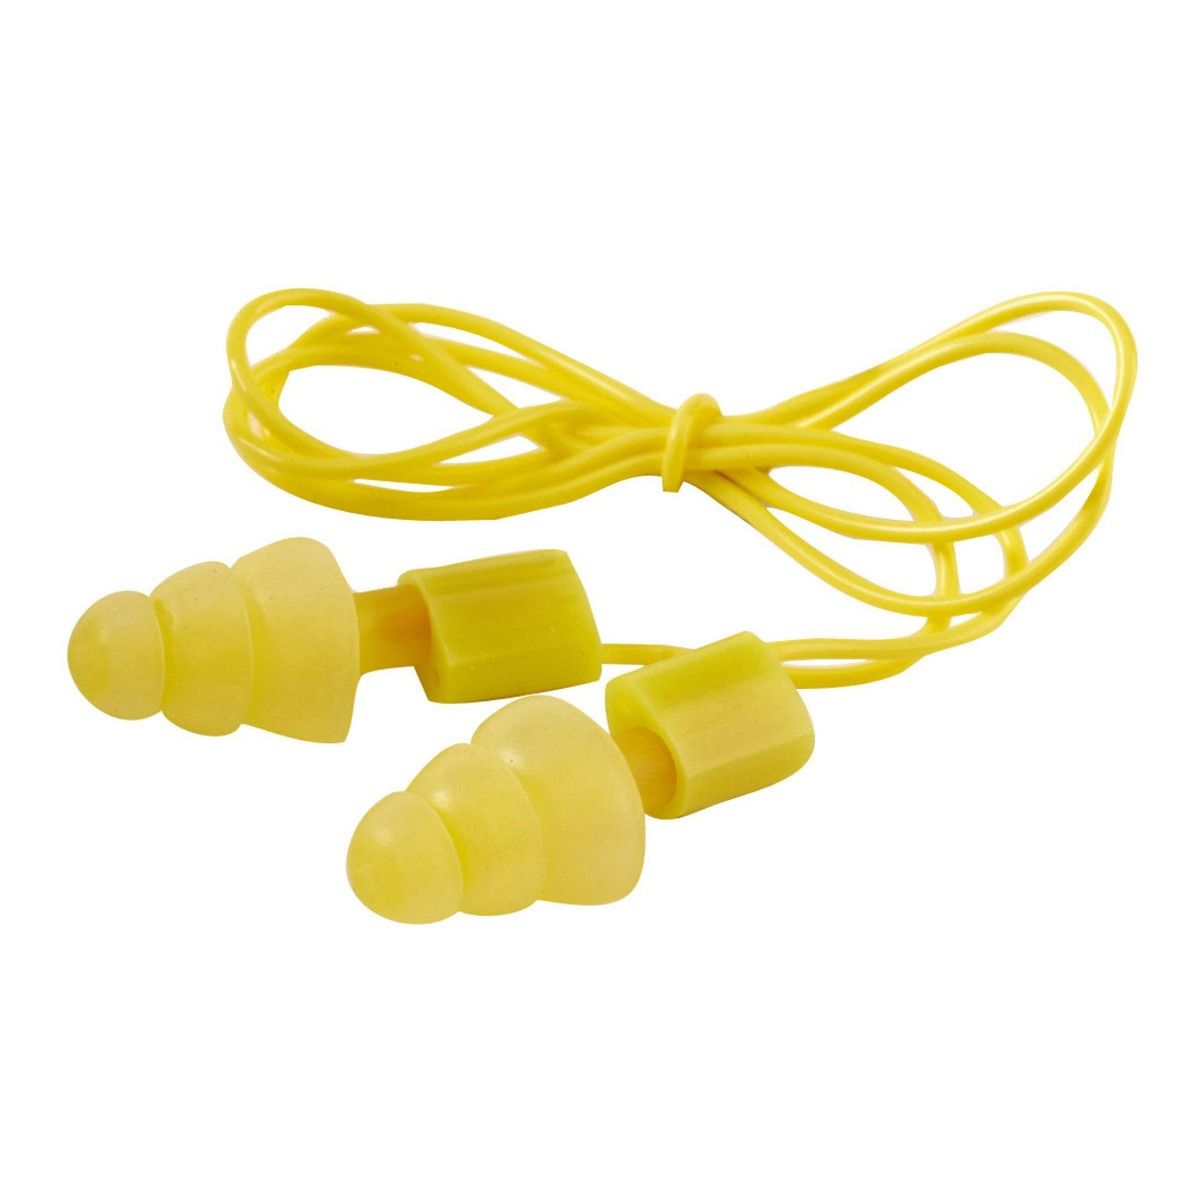 Reusable Soft Silicone Corded Ear Plugs In Box Noise IsolatingGrinding PPE 